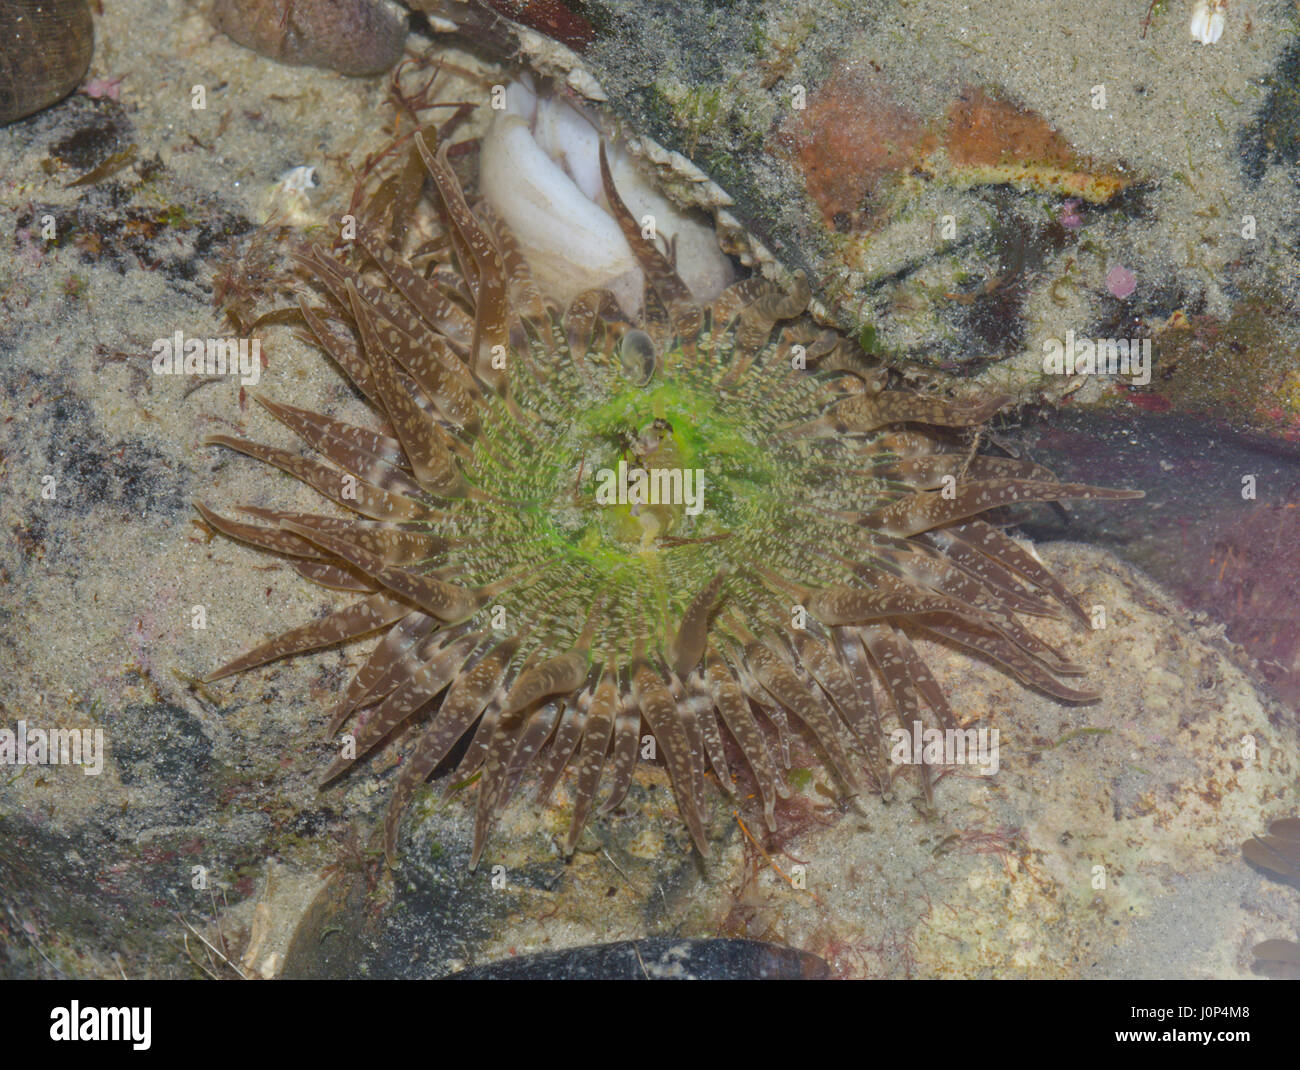 Sea Anemone (Anthopleura ballii) at Low Tide, Sussex, UK Stock Photo